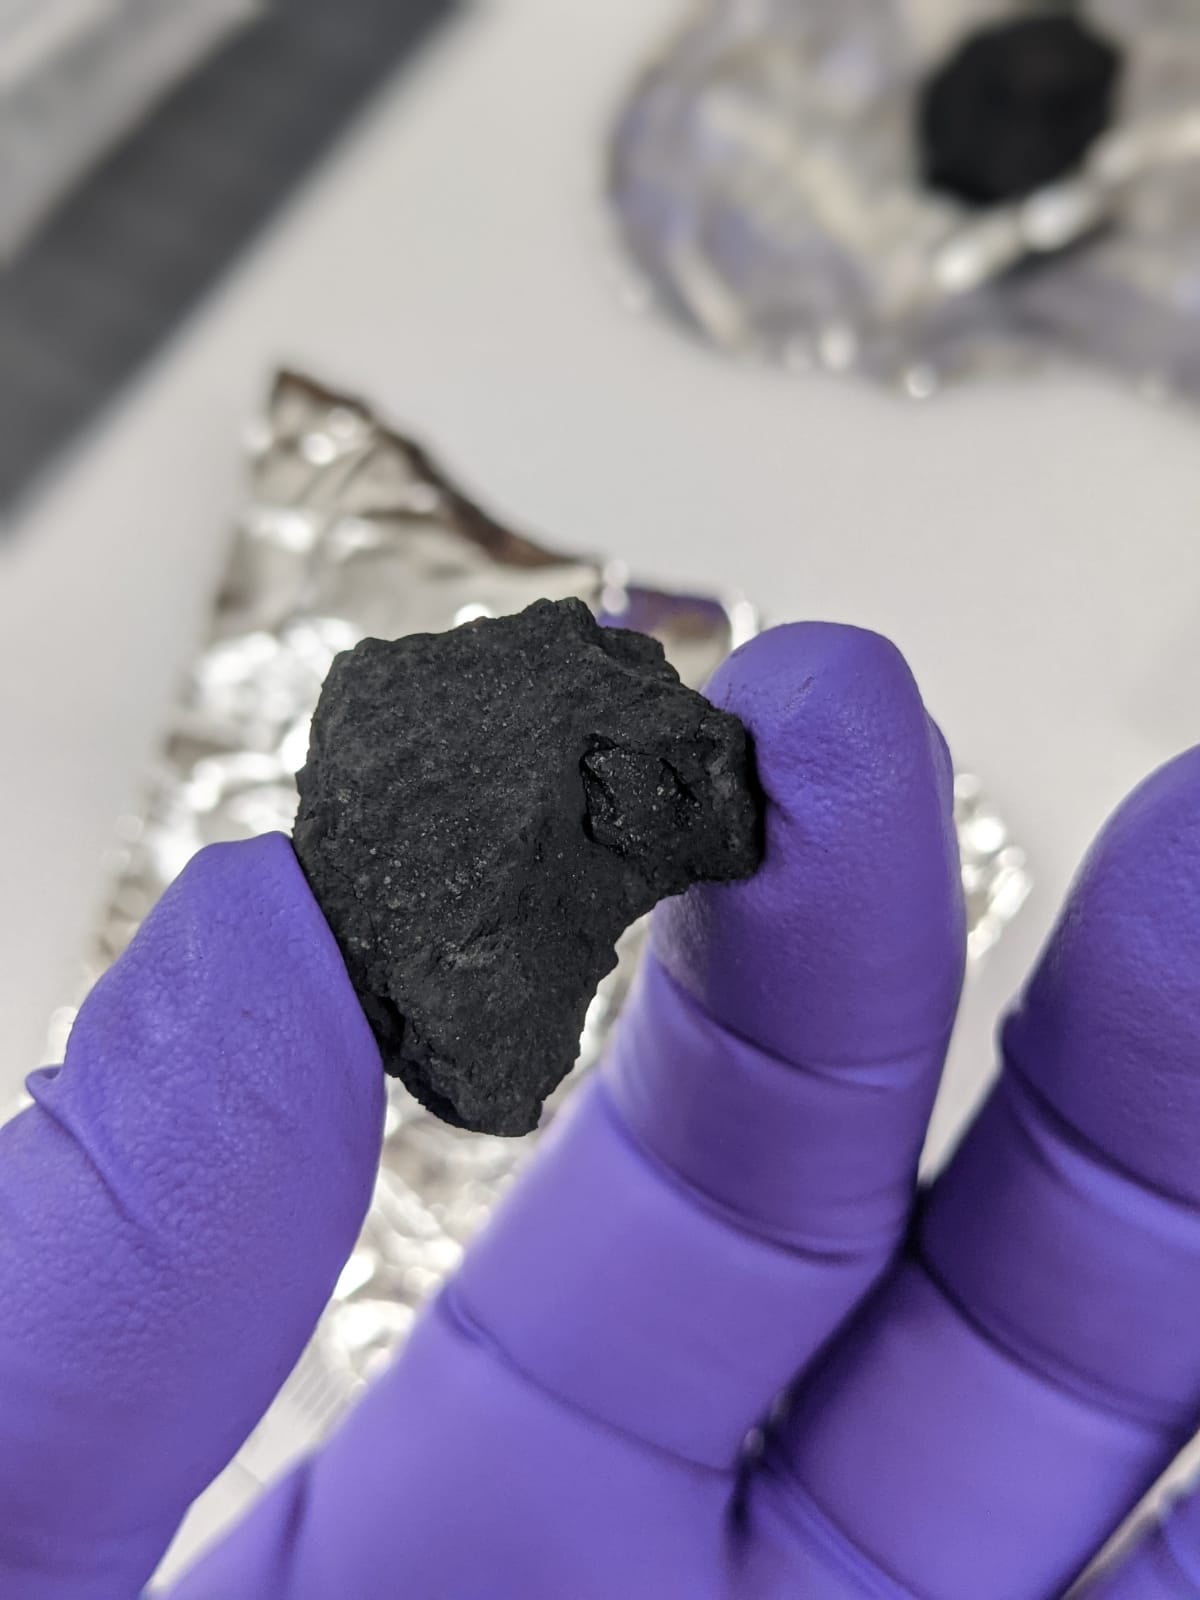 The meteorite fragment was found ona driveway in the Cotswolds town of Winchcombe